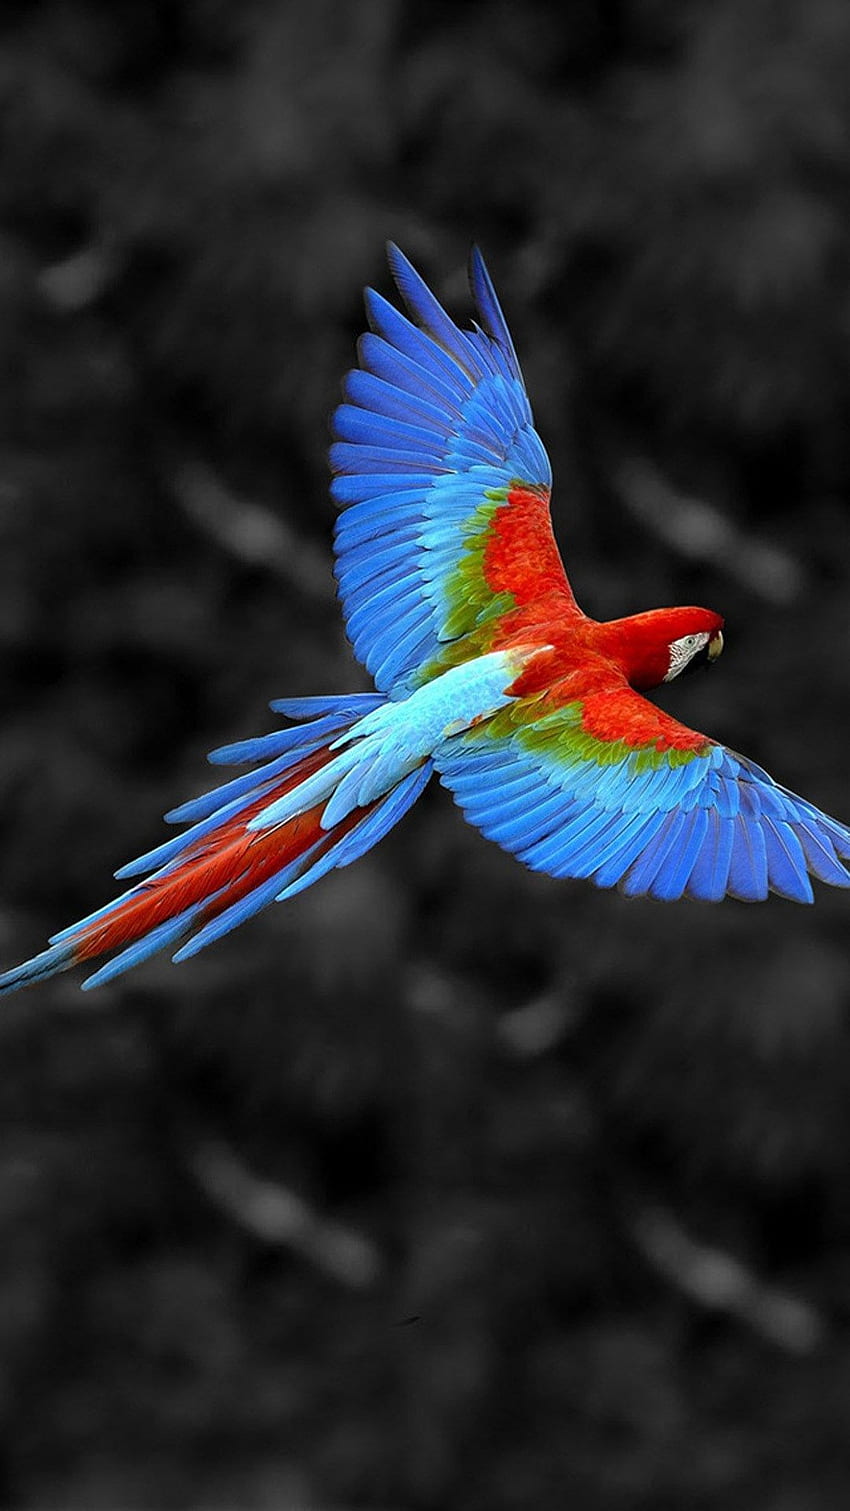 Mobile is a one stop solution for all your mobile needs, Bird HD phone wallpaper